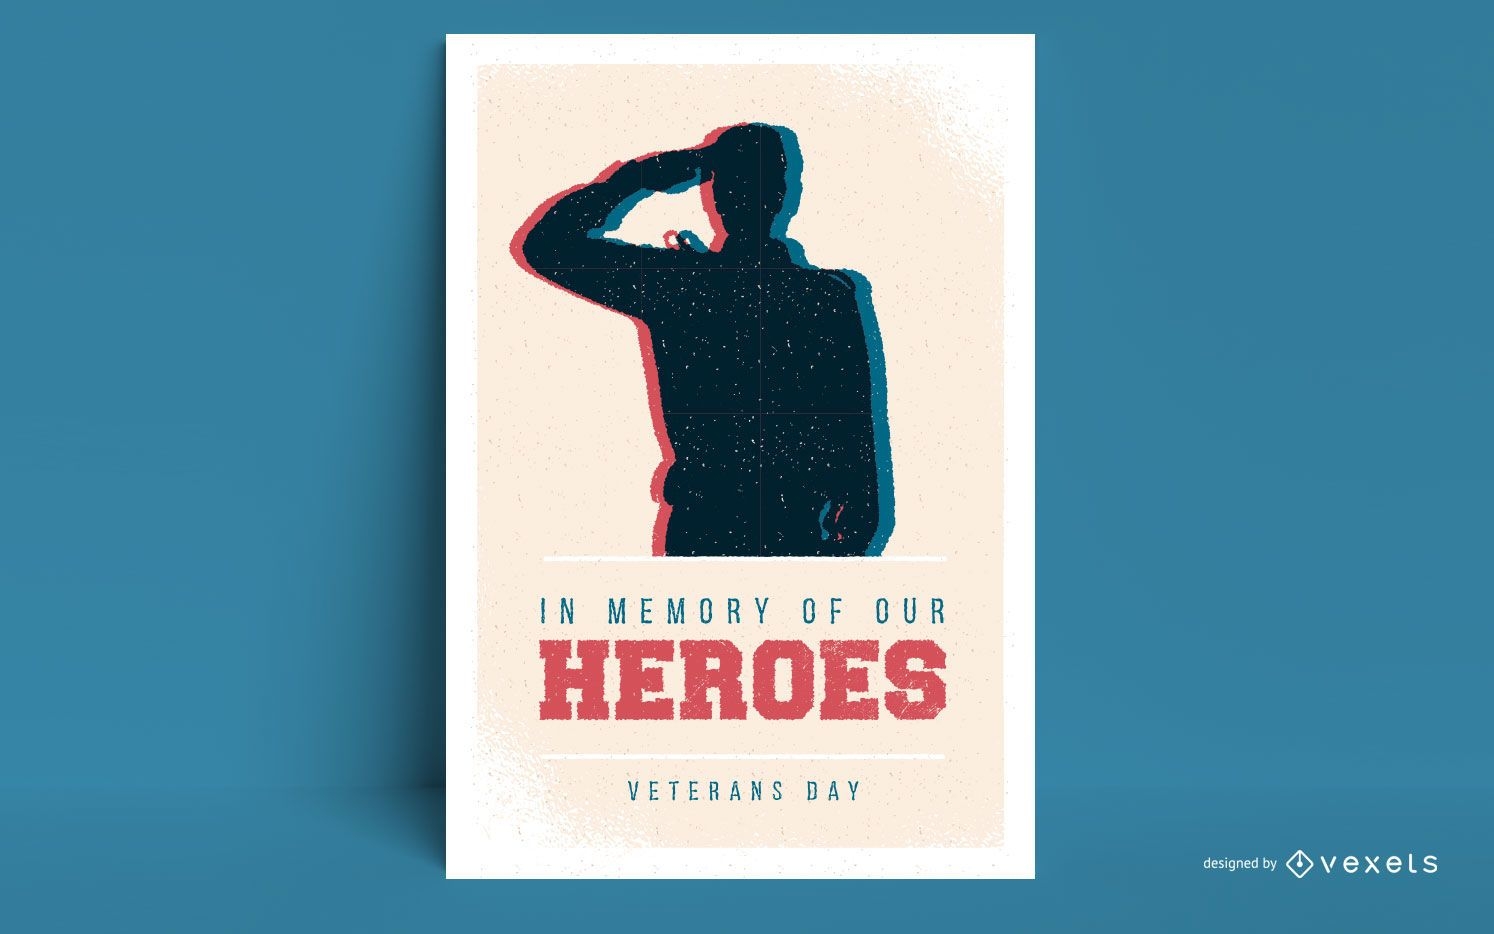 Veterans day heroes poster template